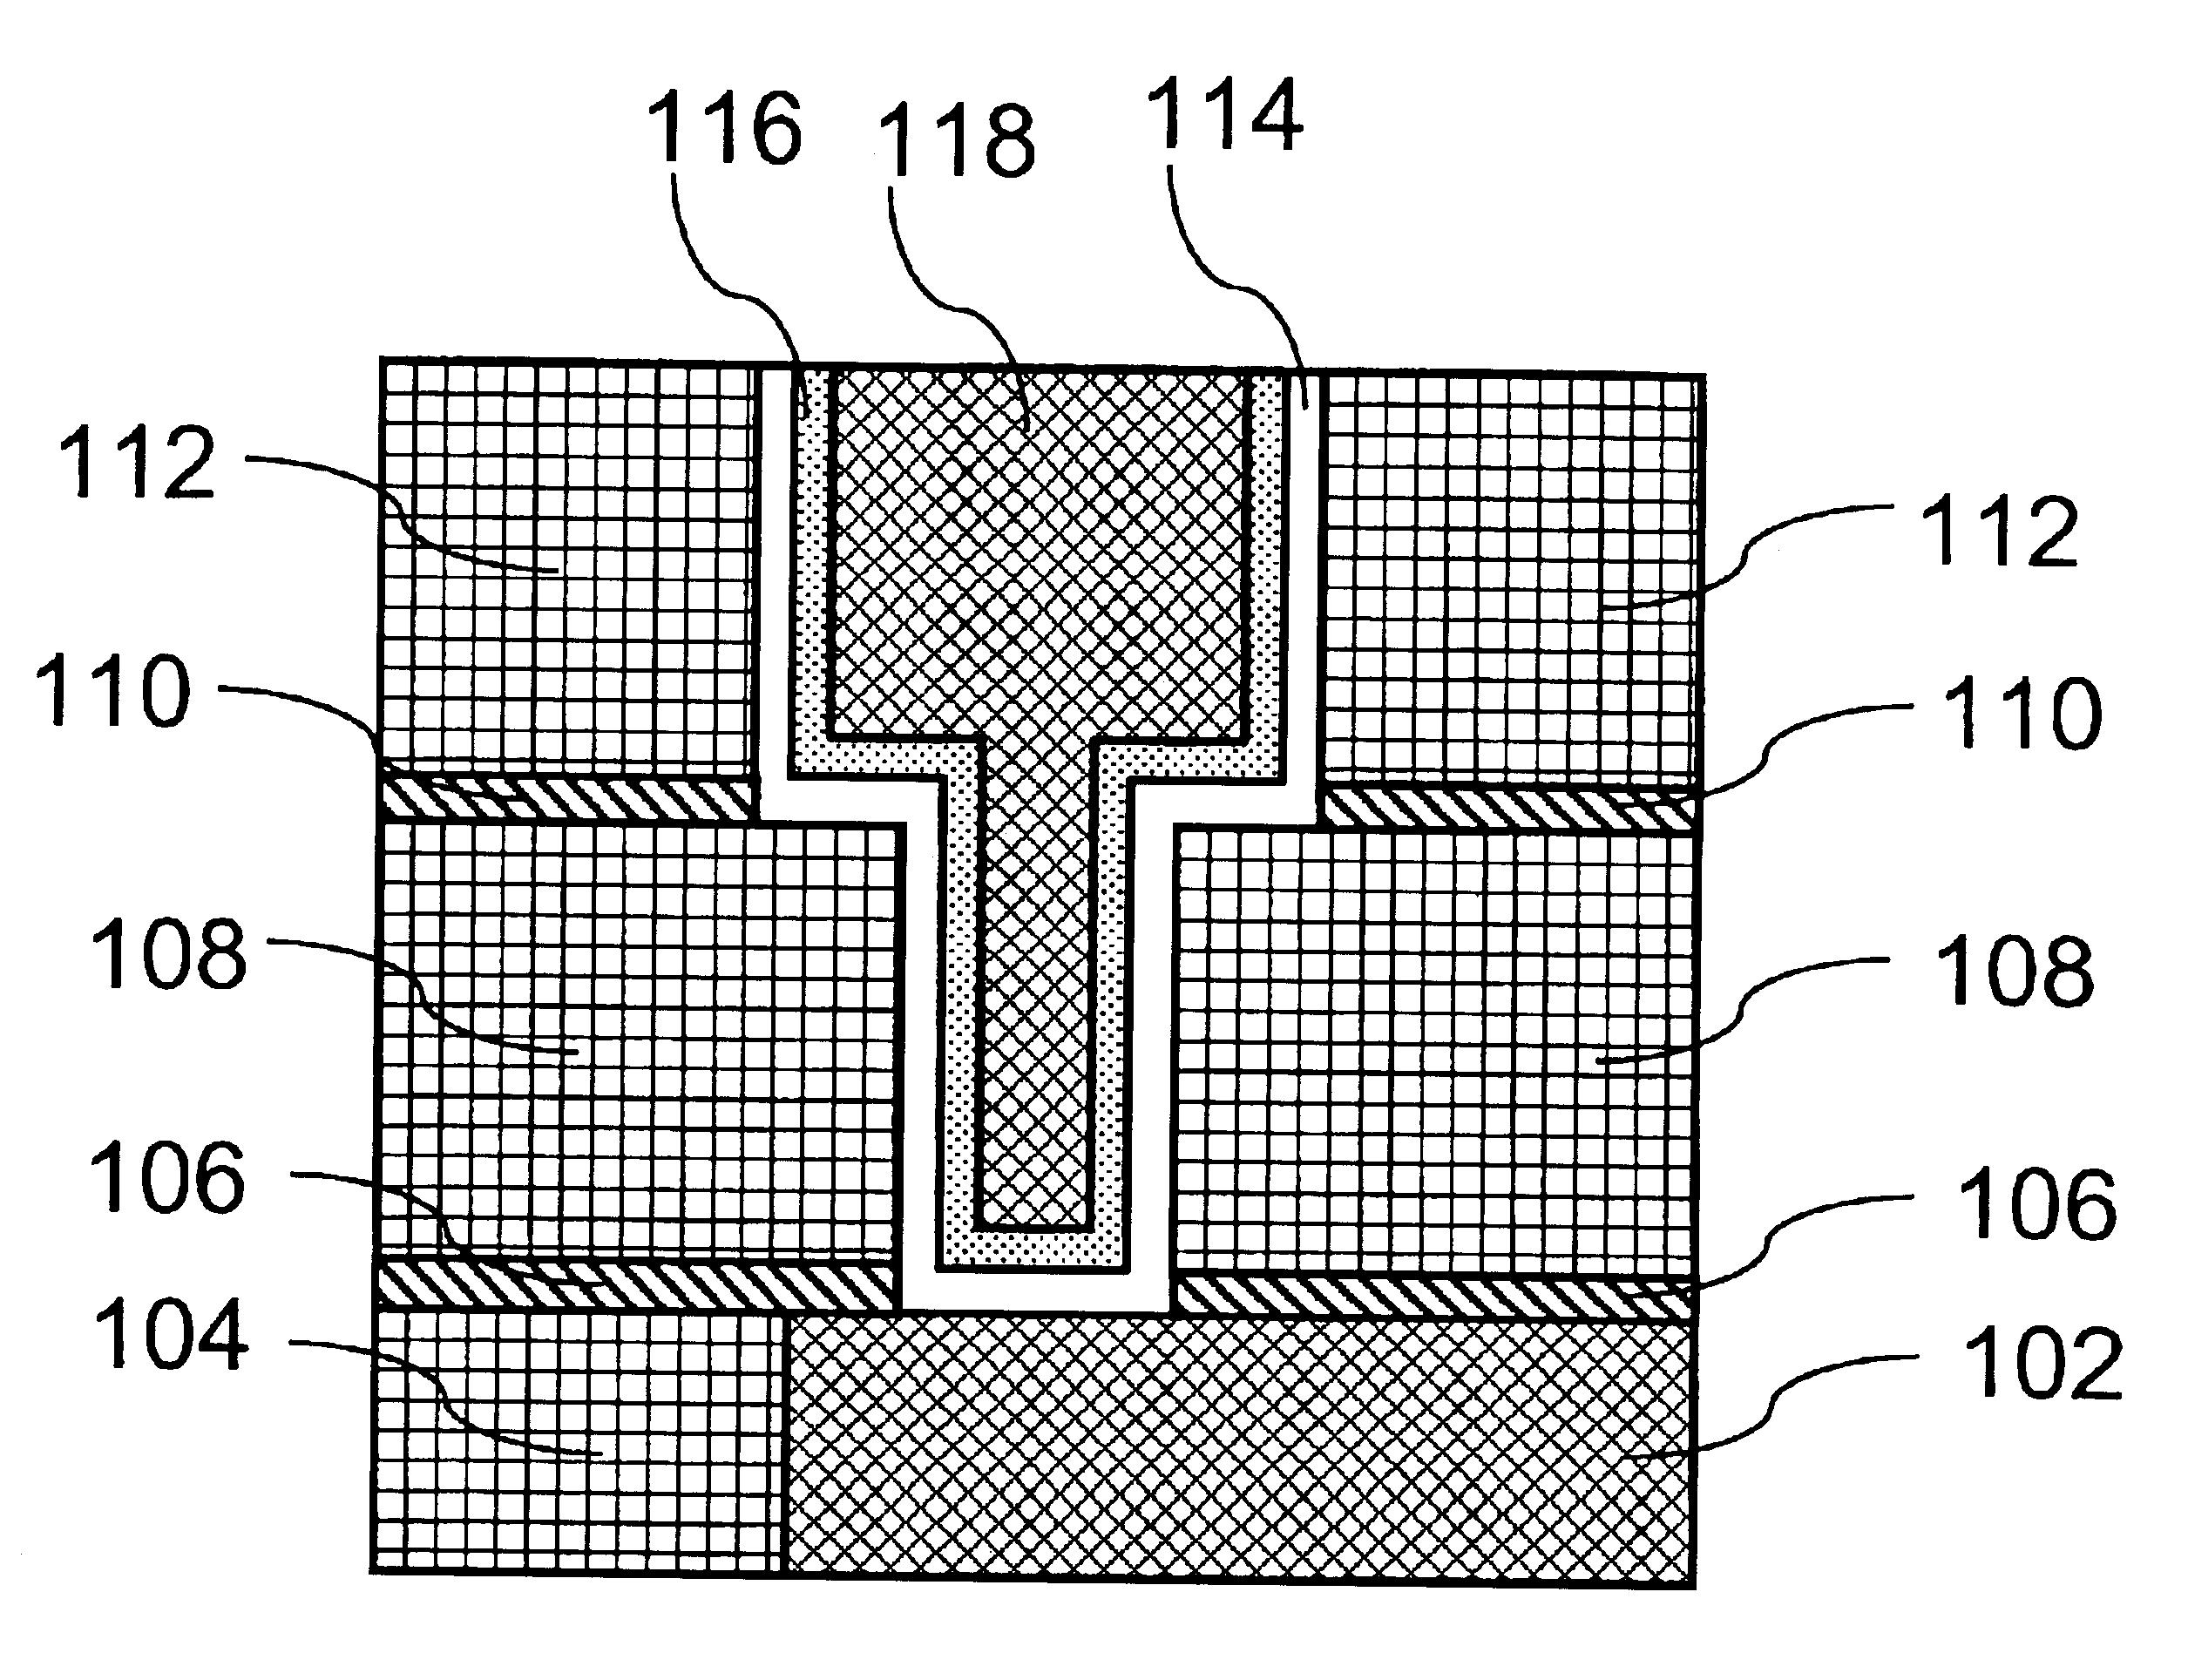 Atomic layer deposition methods for forming a multi-layer adhesion-barrier layer for integrated circuits